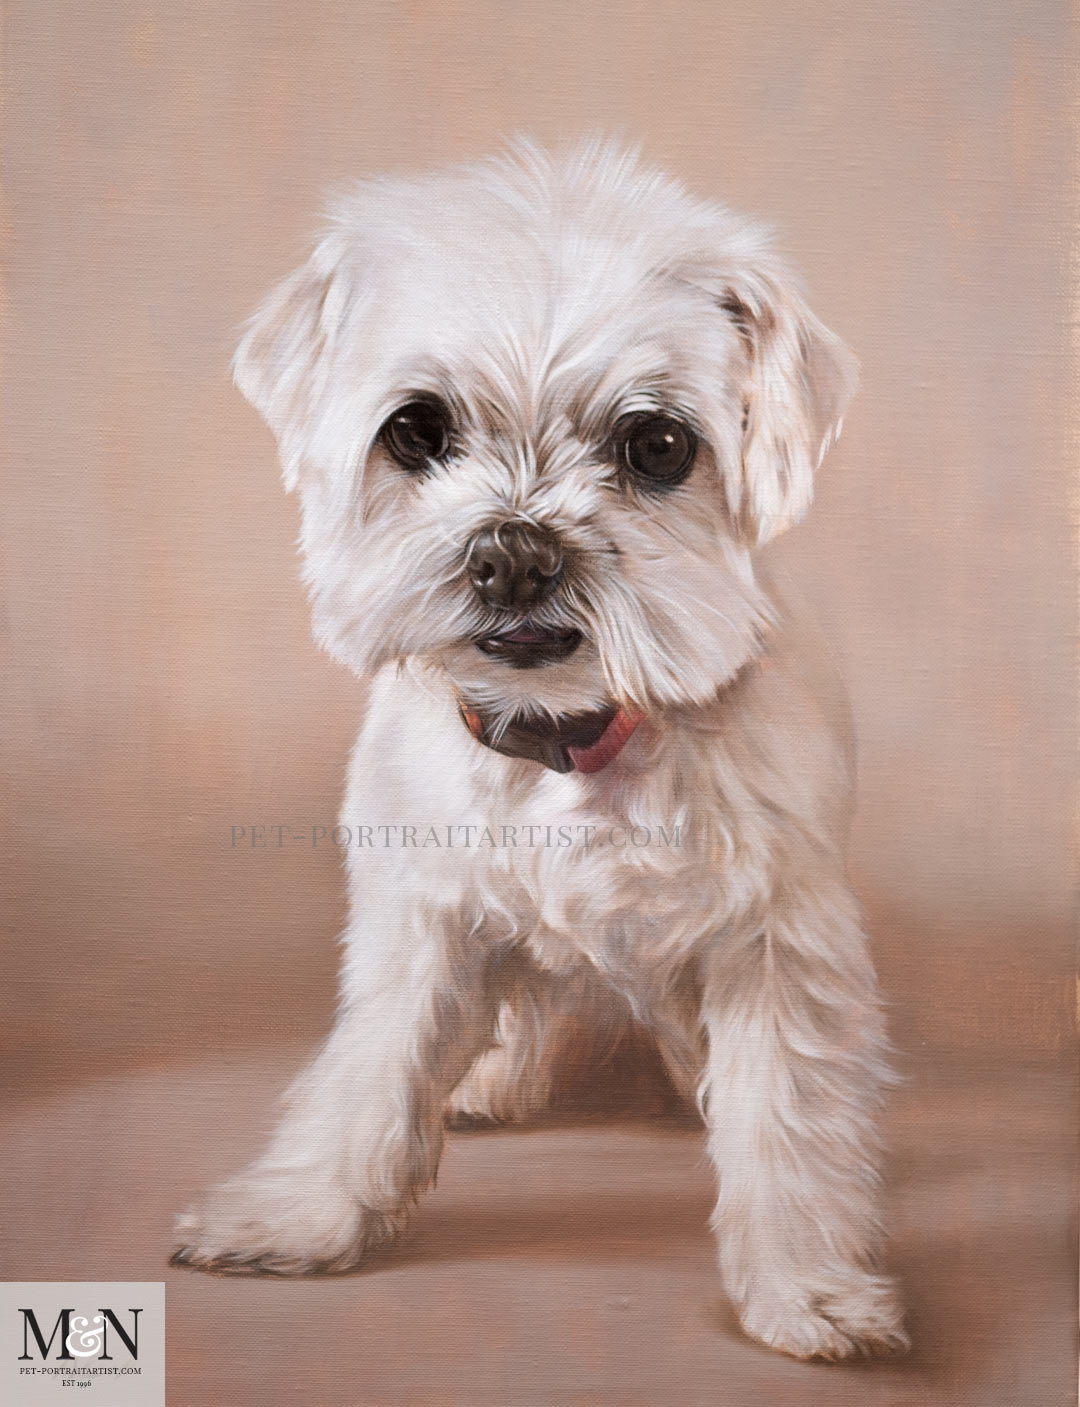 Melanie's February Monthly News - Oil Painting of Paddy